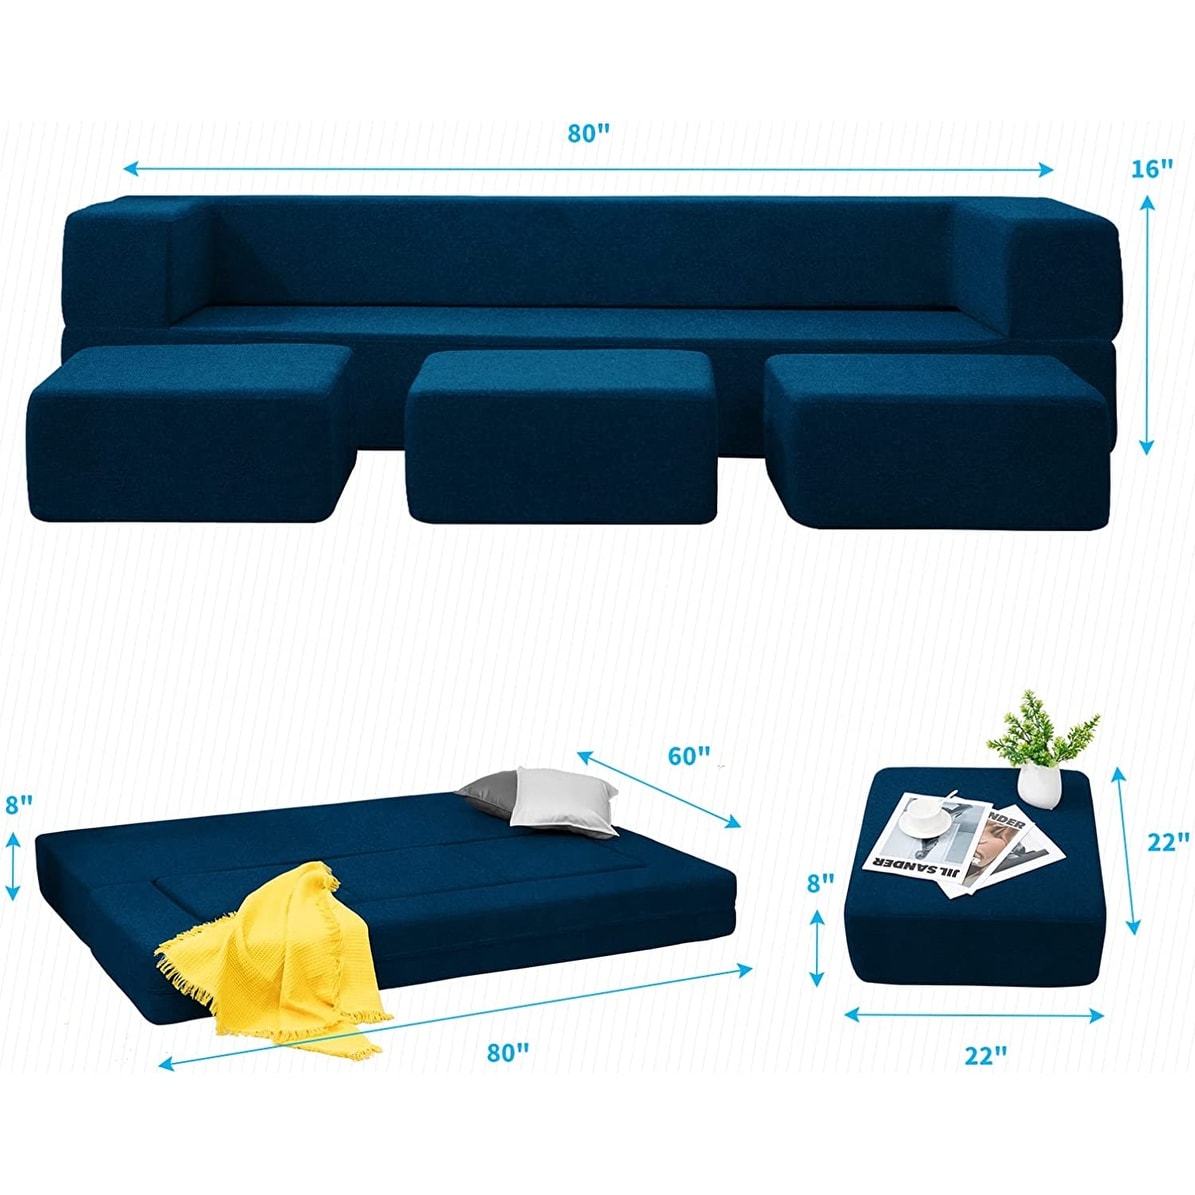 MAXDIVANI WOTU Folding Bed Couch 10 Inch Fold Out Sofa Bed Memory Foam  Mattress Comfortable Floor Couch Sleeper Sofa Twin, Dark Blue Great for